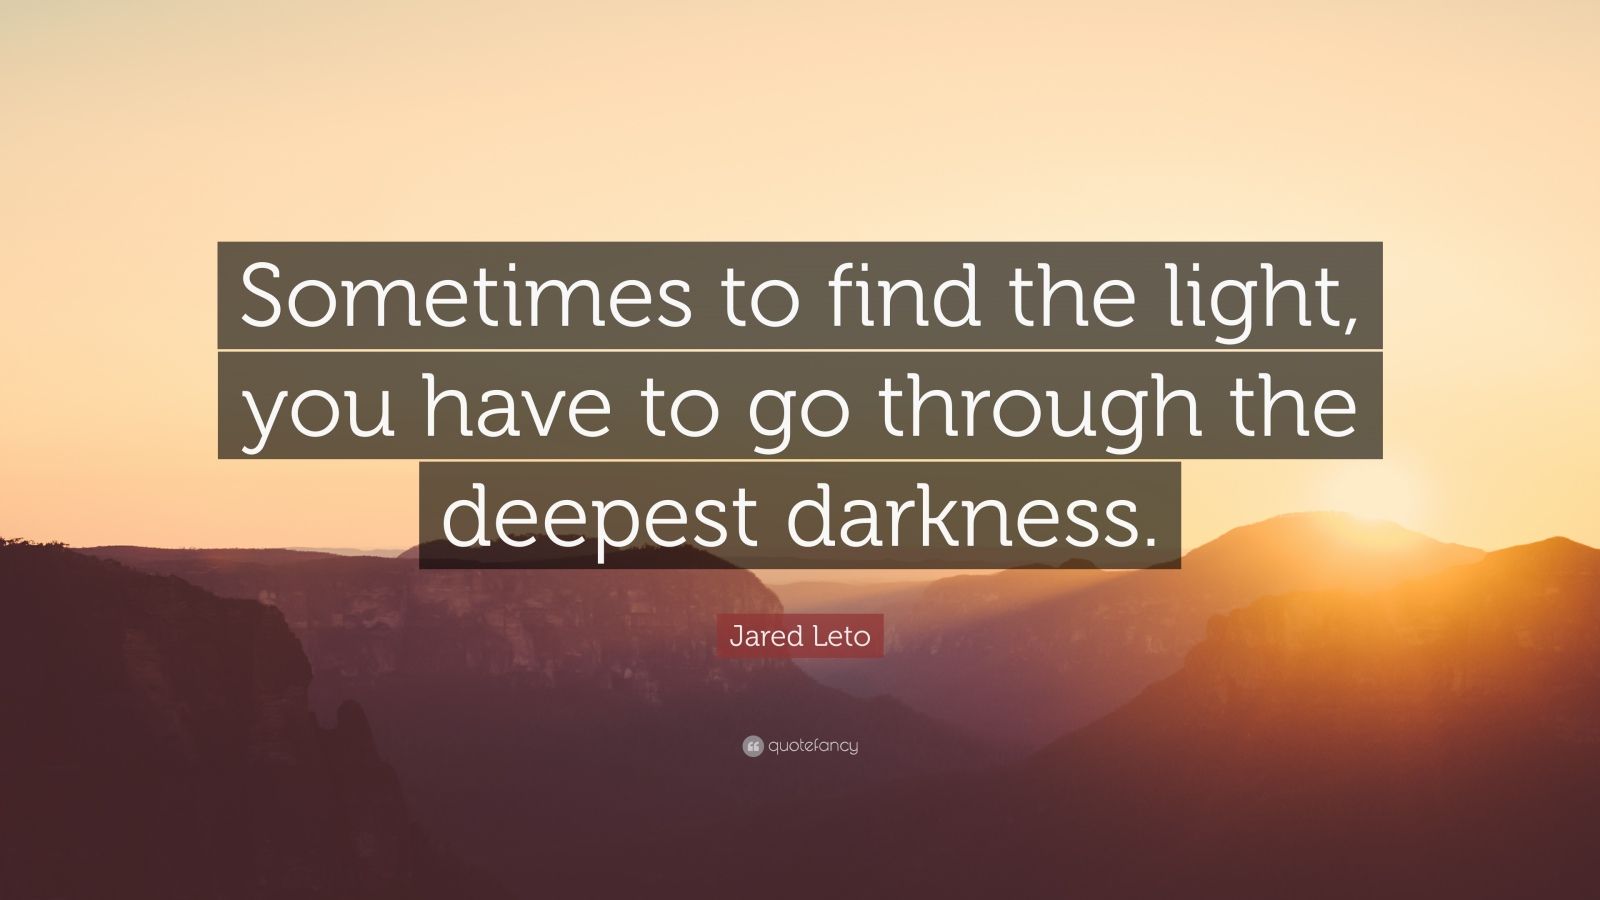 315360 Jared Leto Quote Sometimes to find the light you have to go